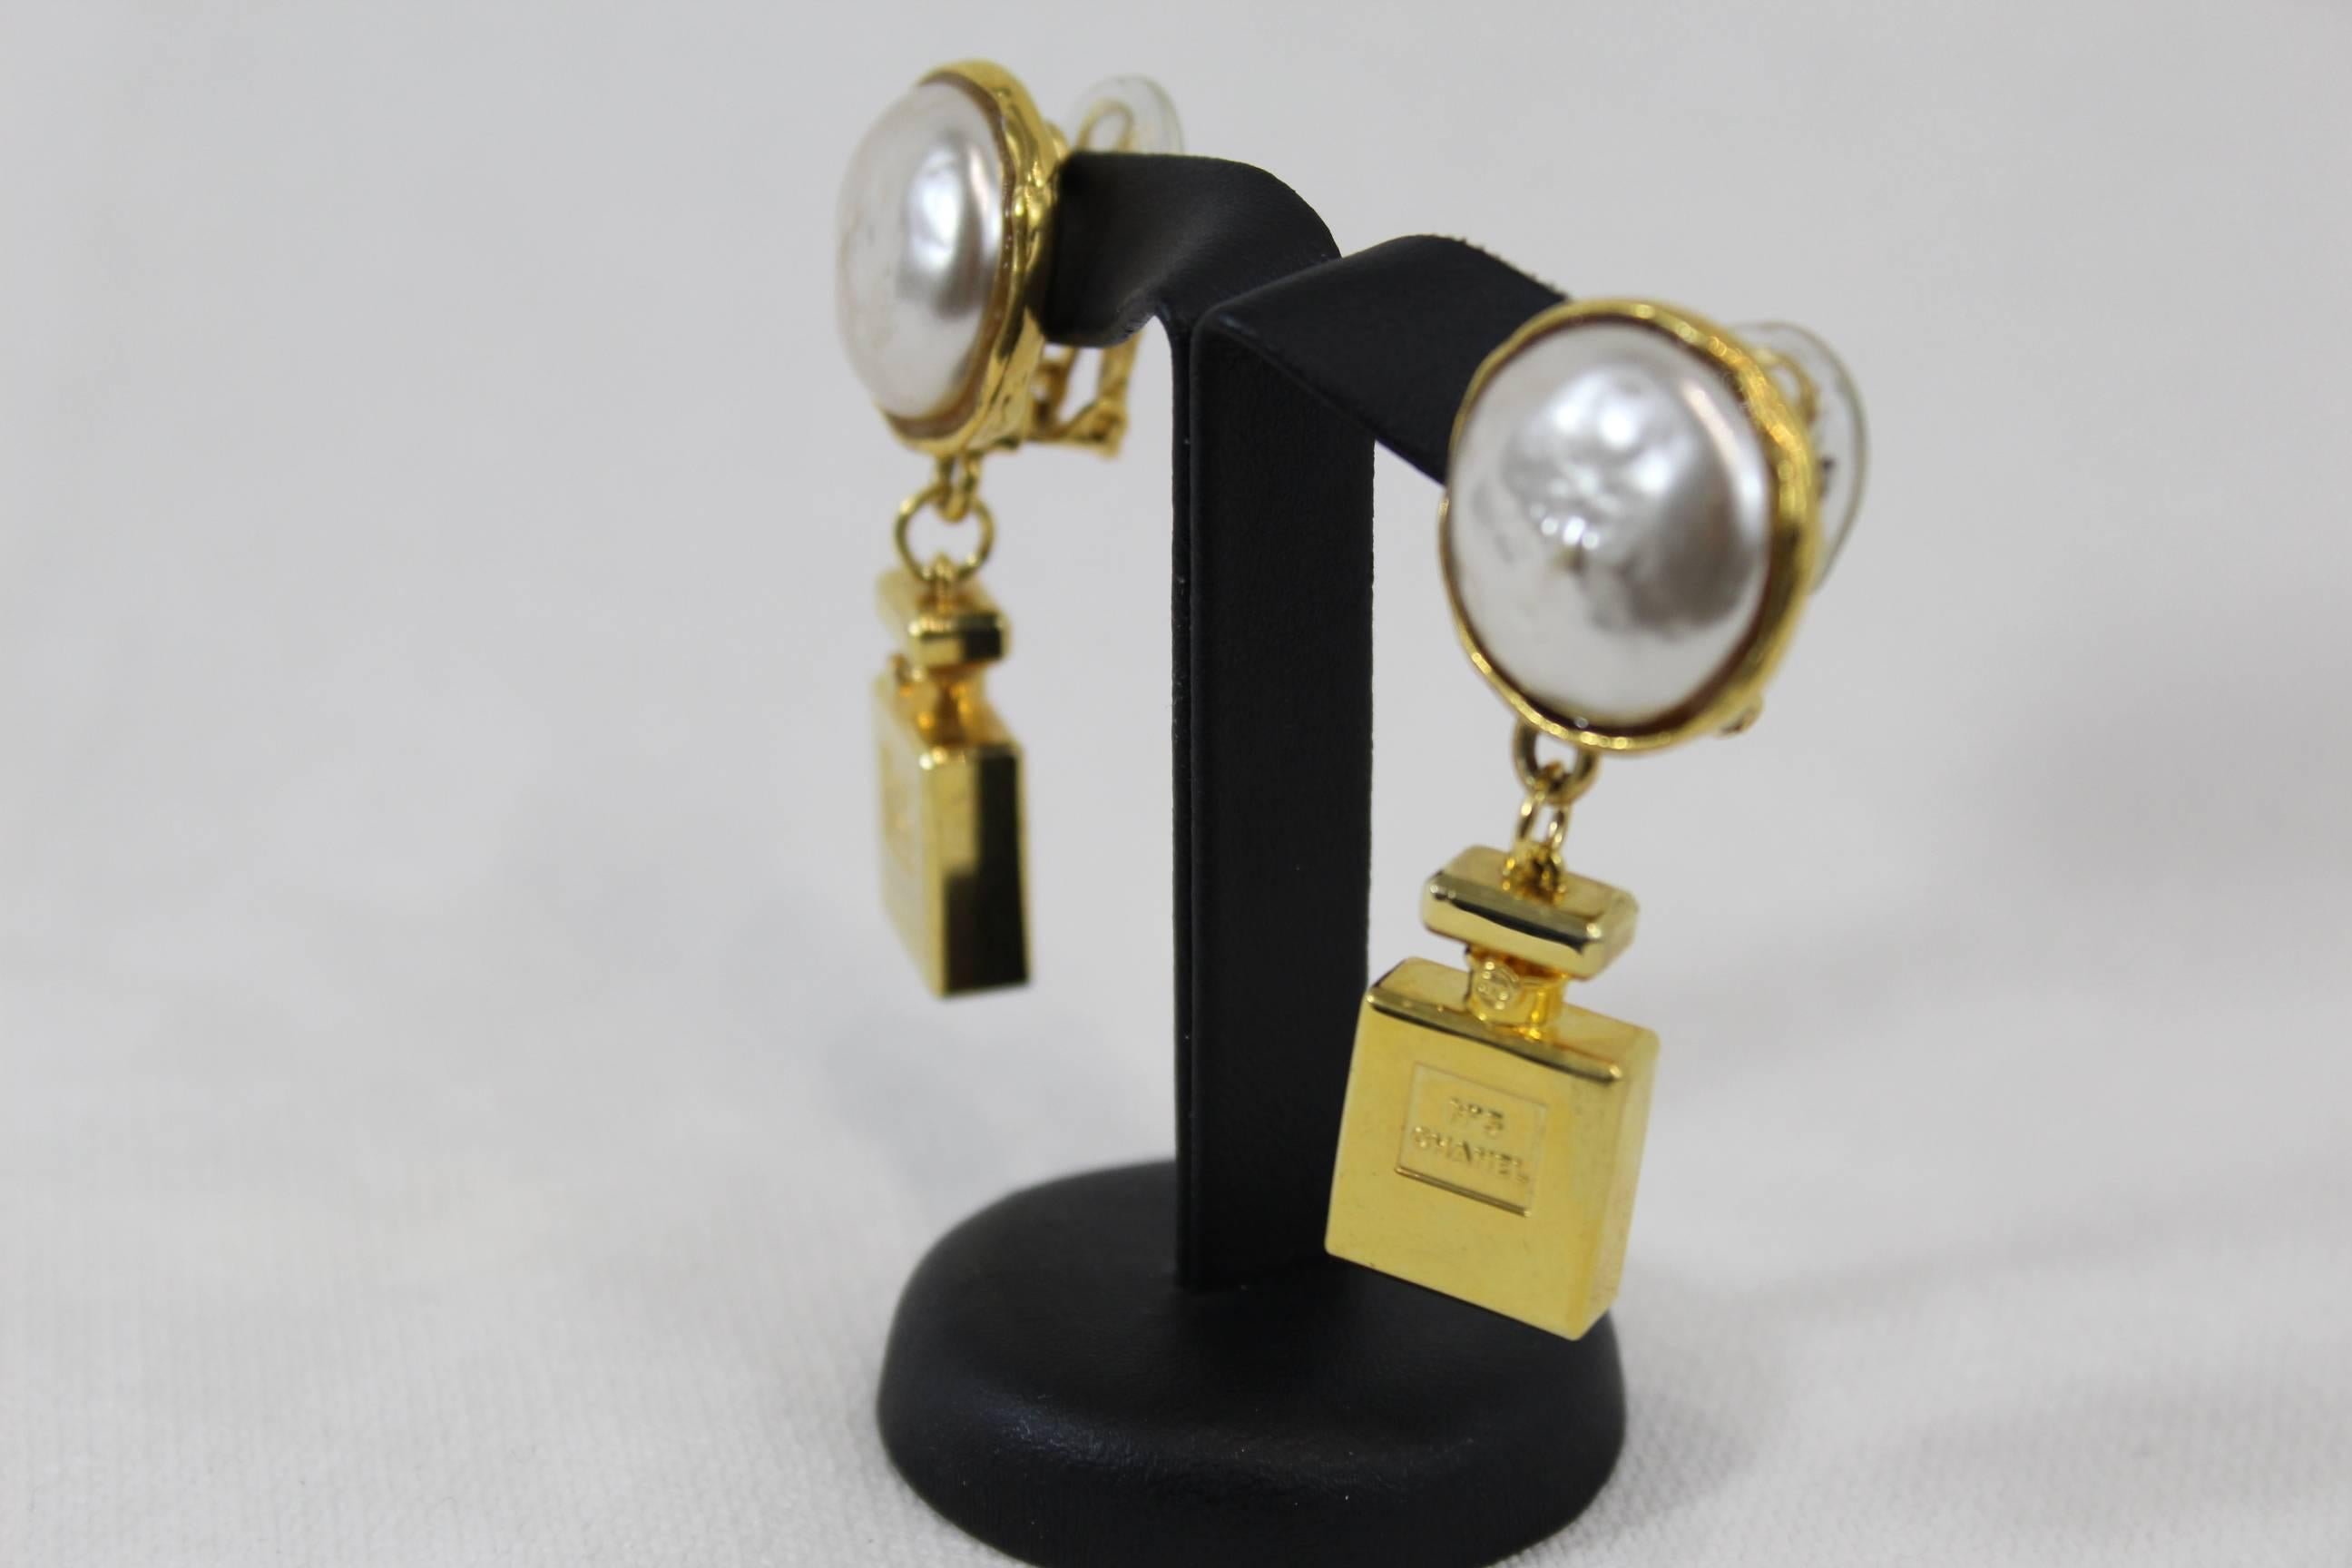 Rare Chanel N°5 earrings in excellent condition from the 90's.

Good condition but some signs of normal wear.

Sold with box
